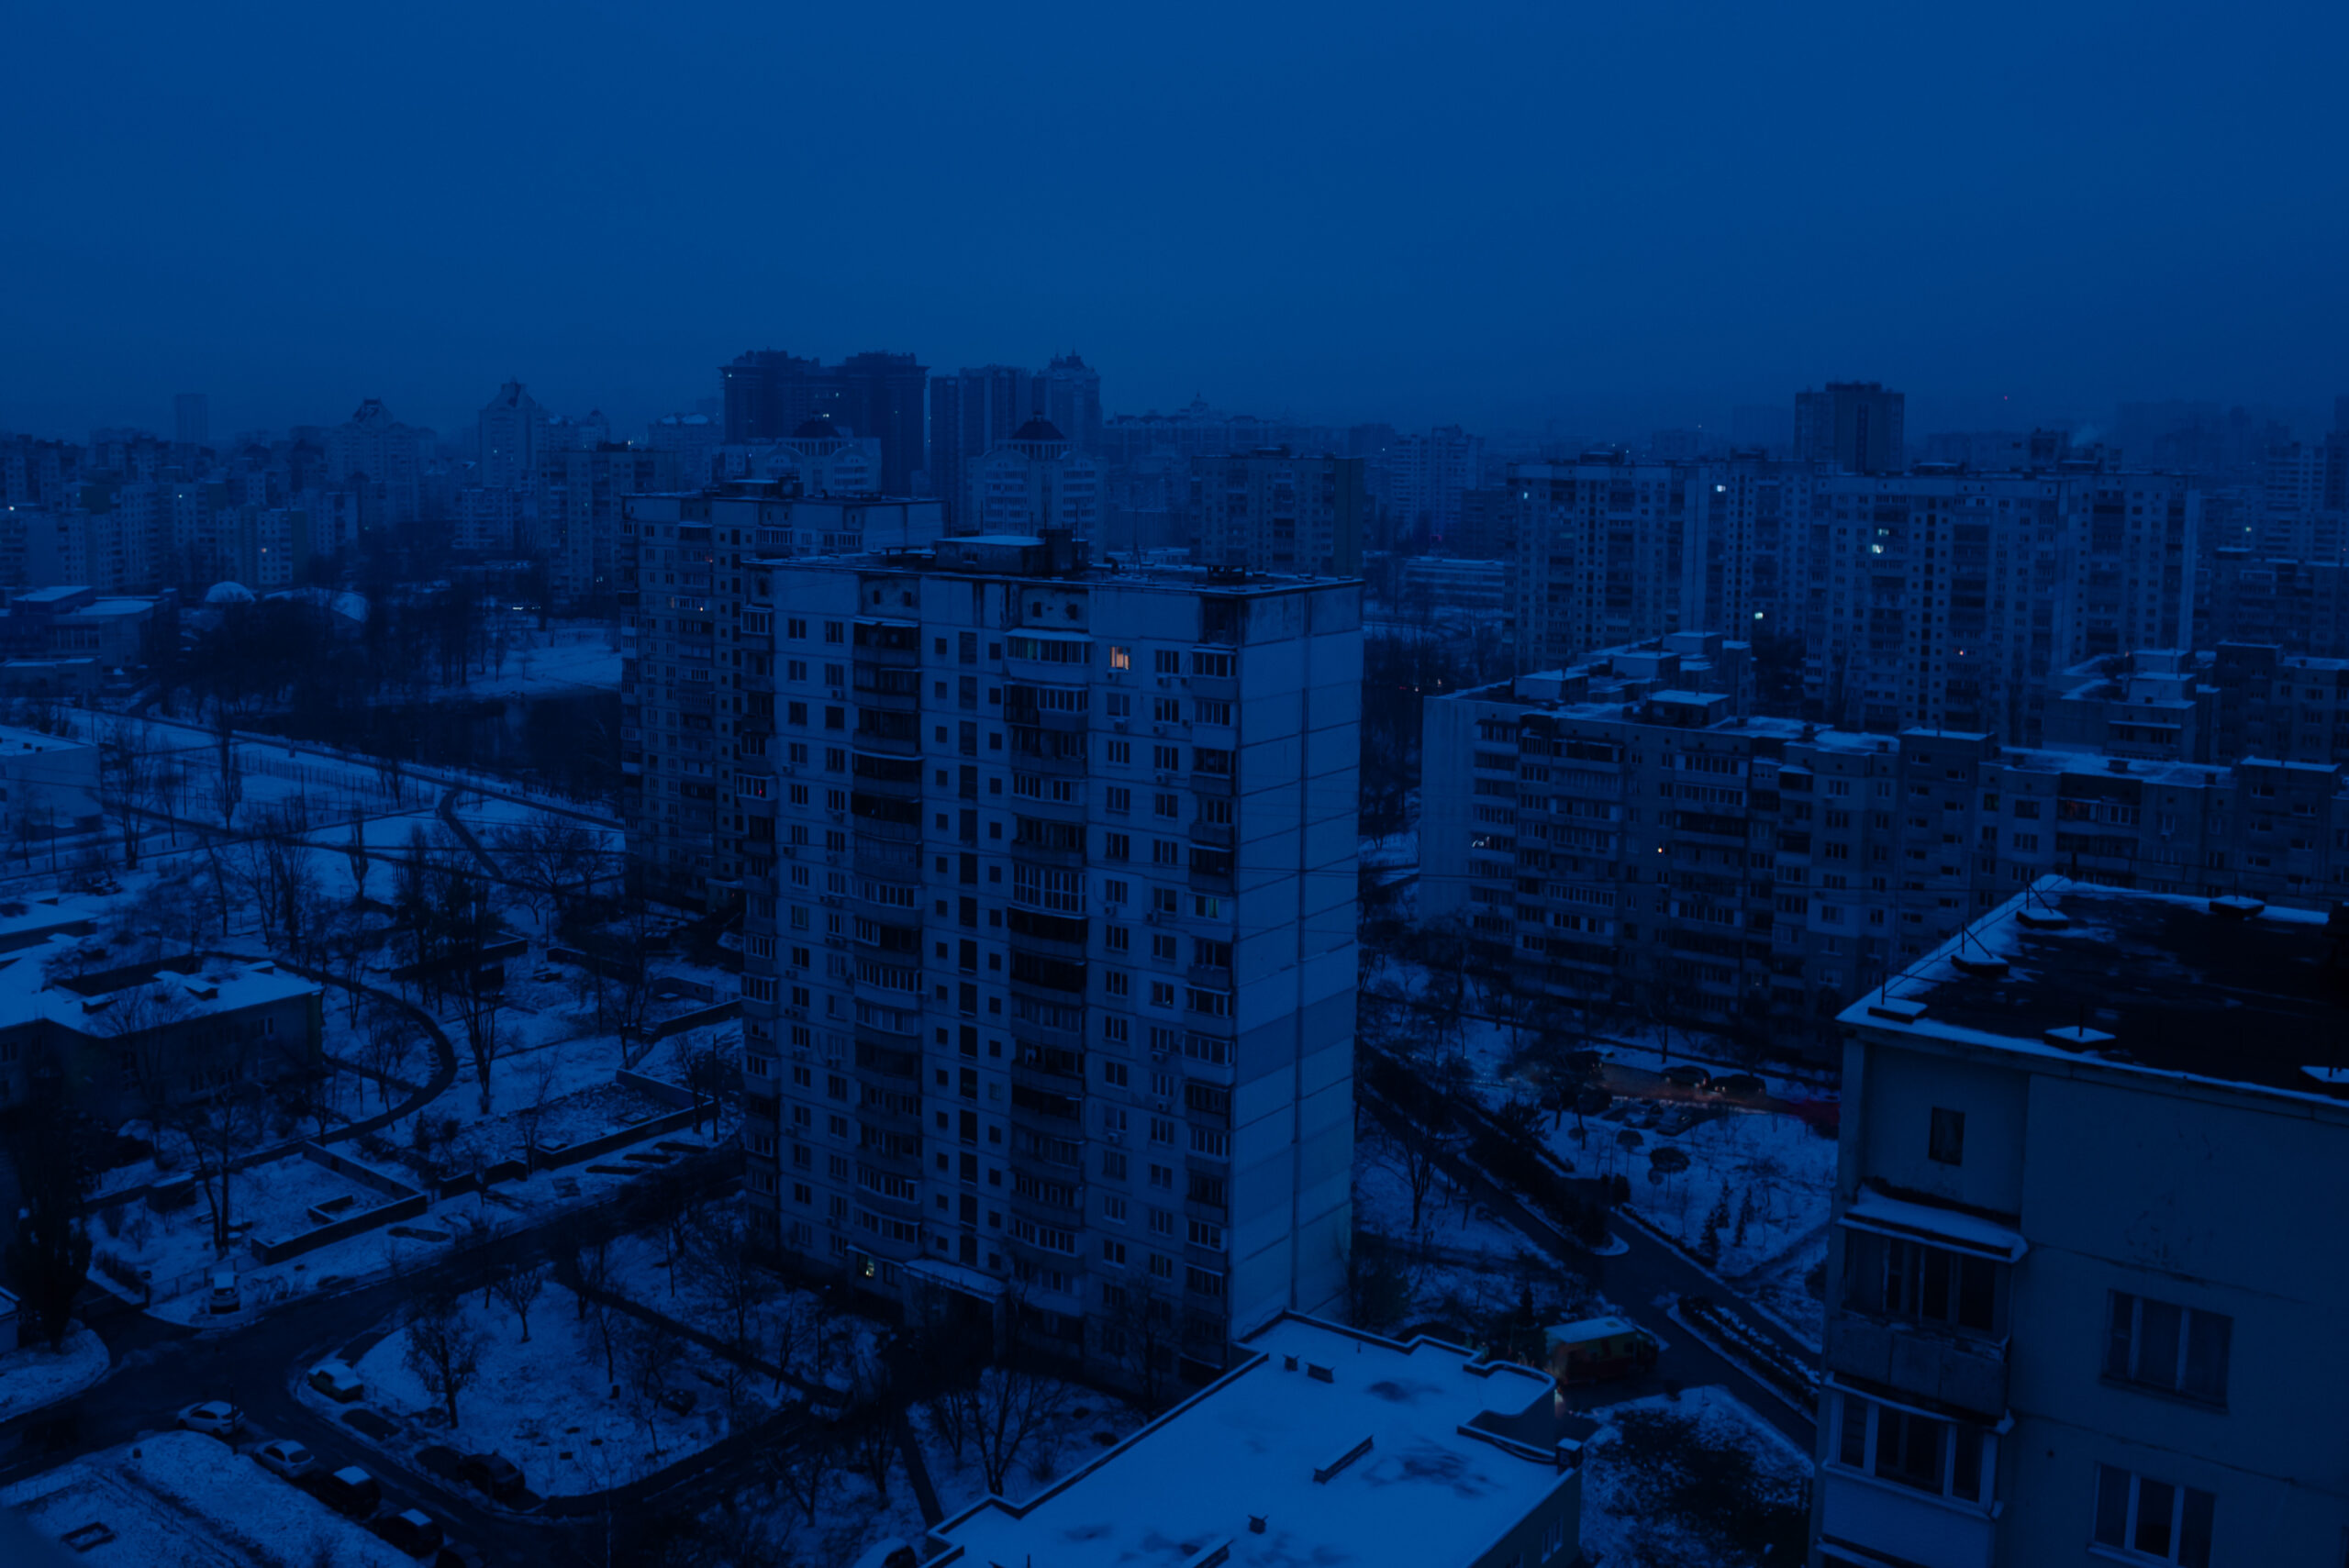 A city in almost total darkness, with ambient light depicting a blue hue. There is snow on the ground.